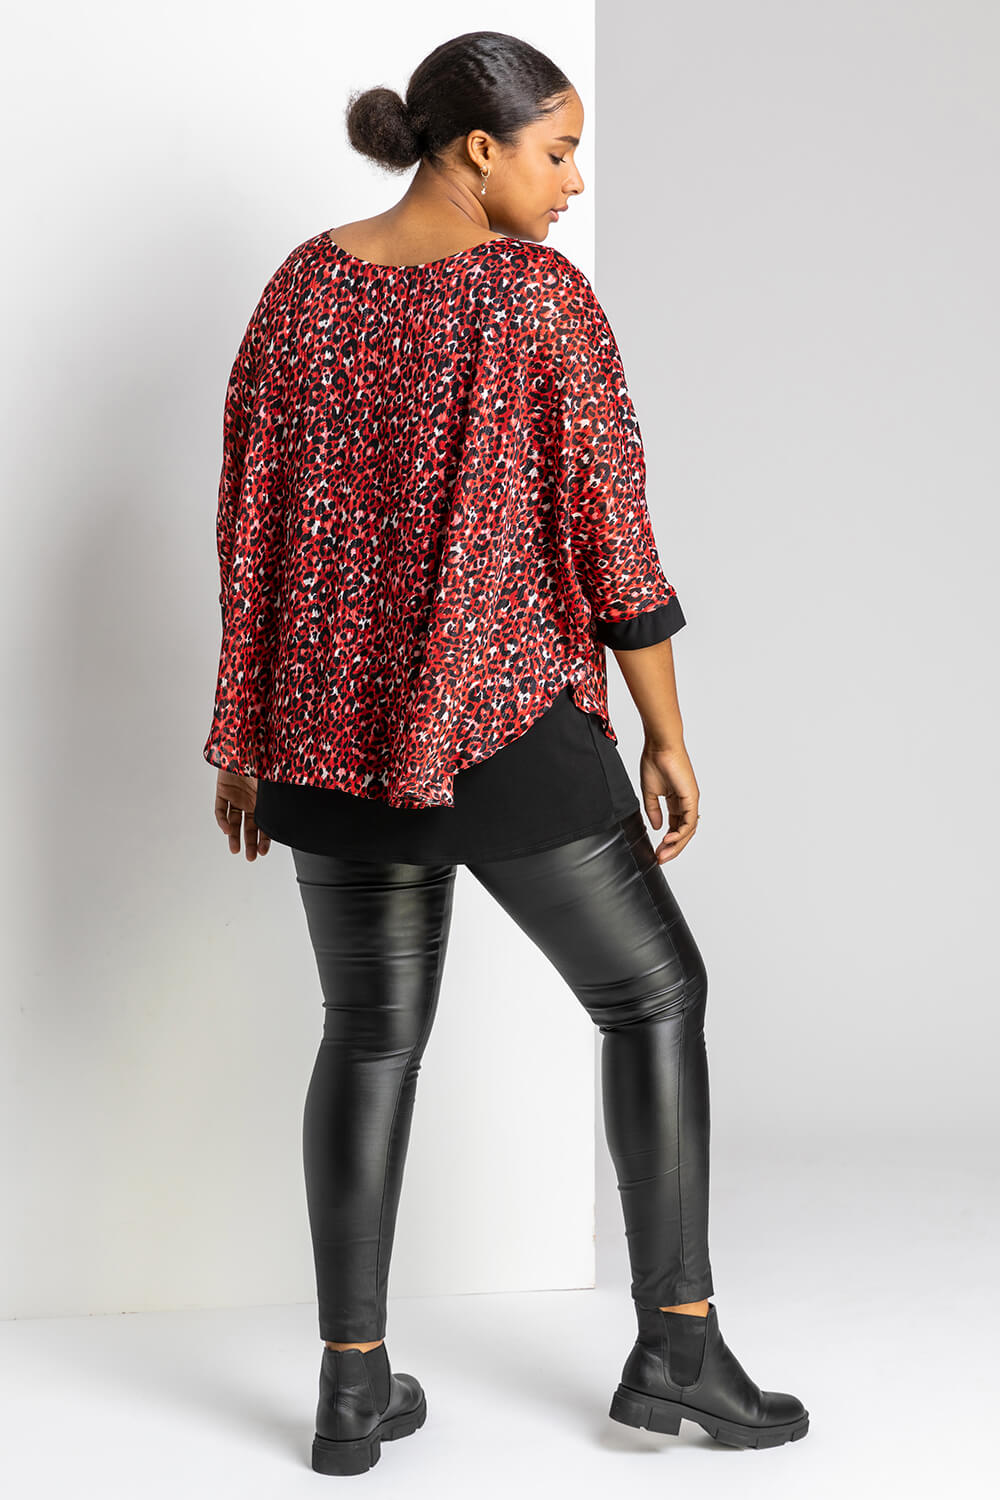 Red Curve Animal Print Overlay Top, Image 2 of 5